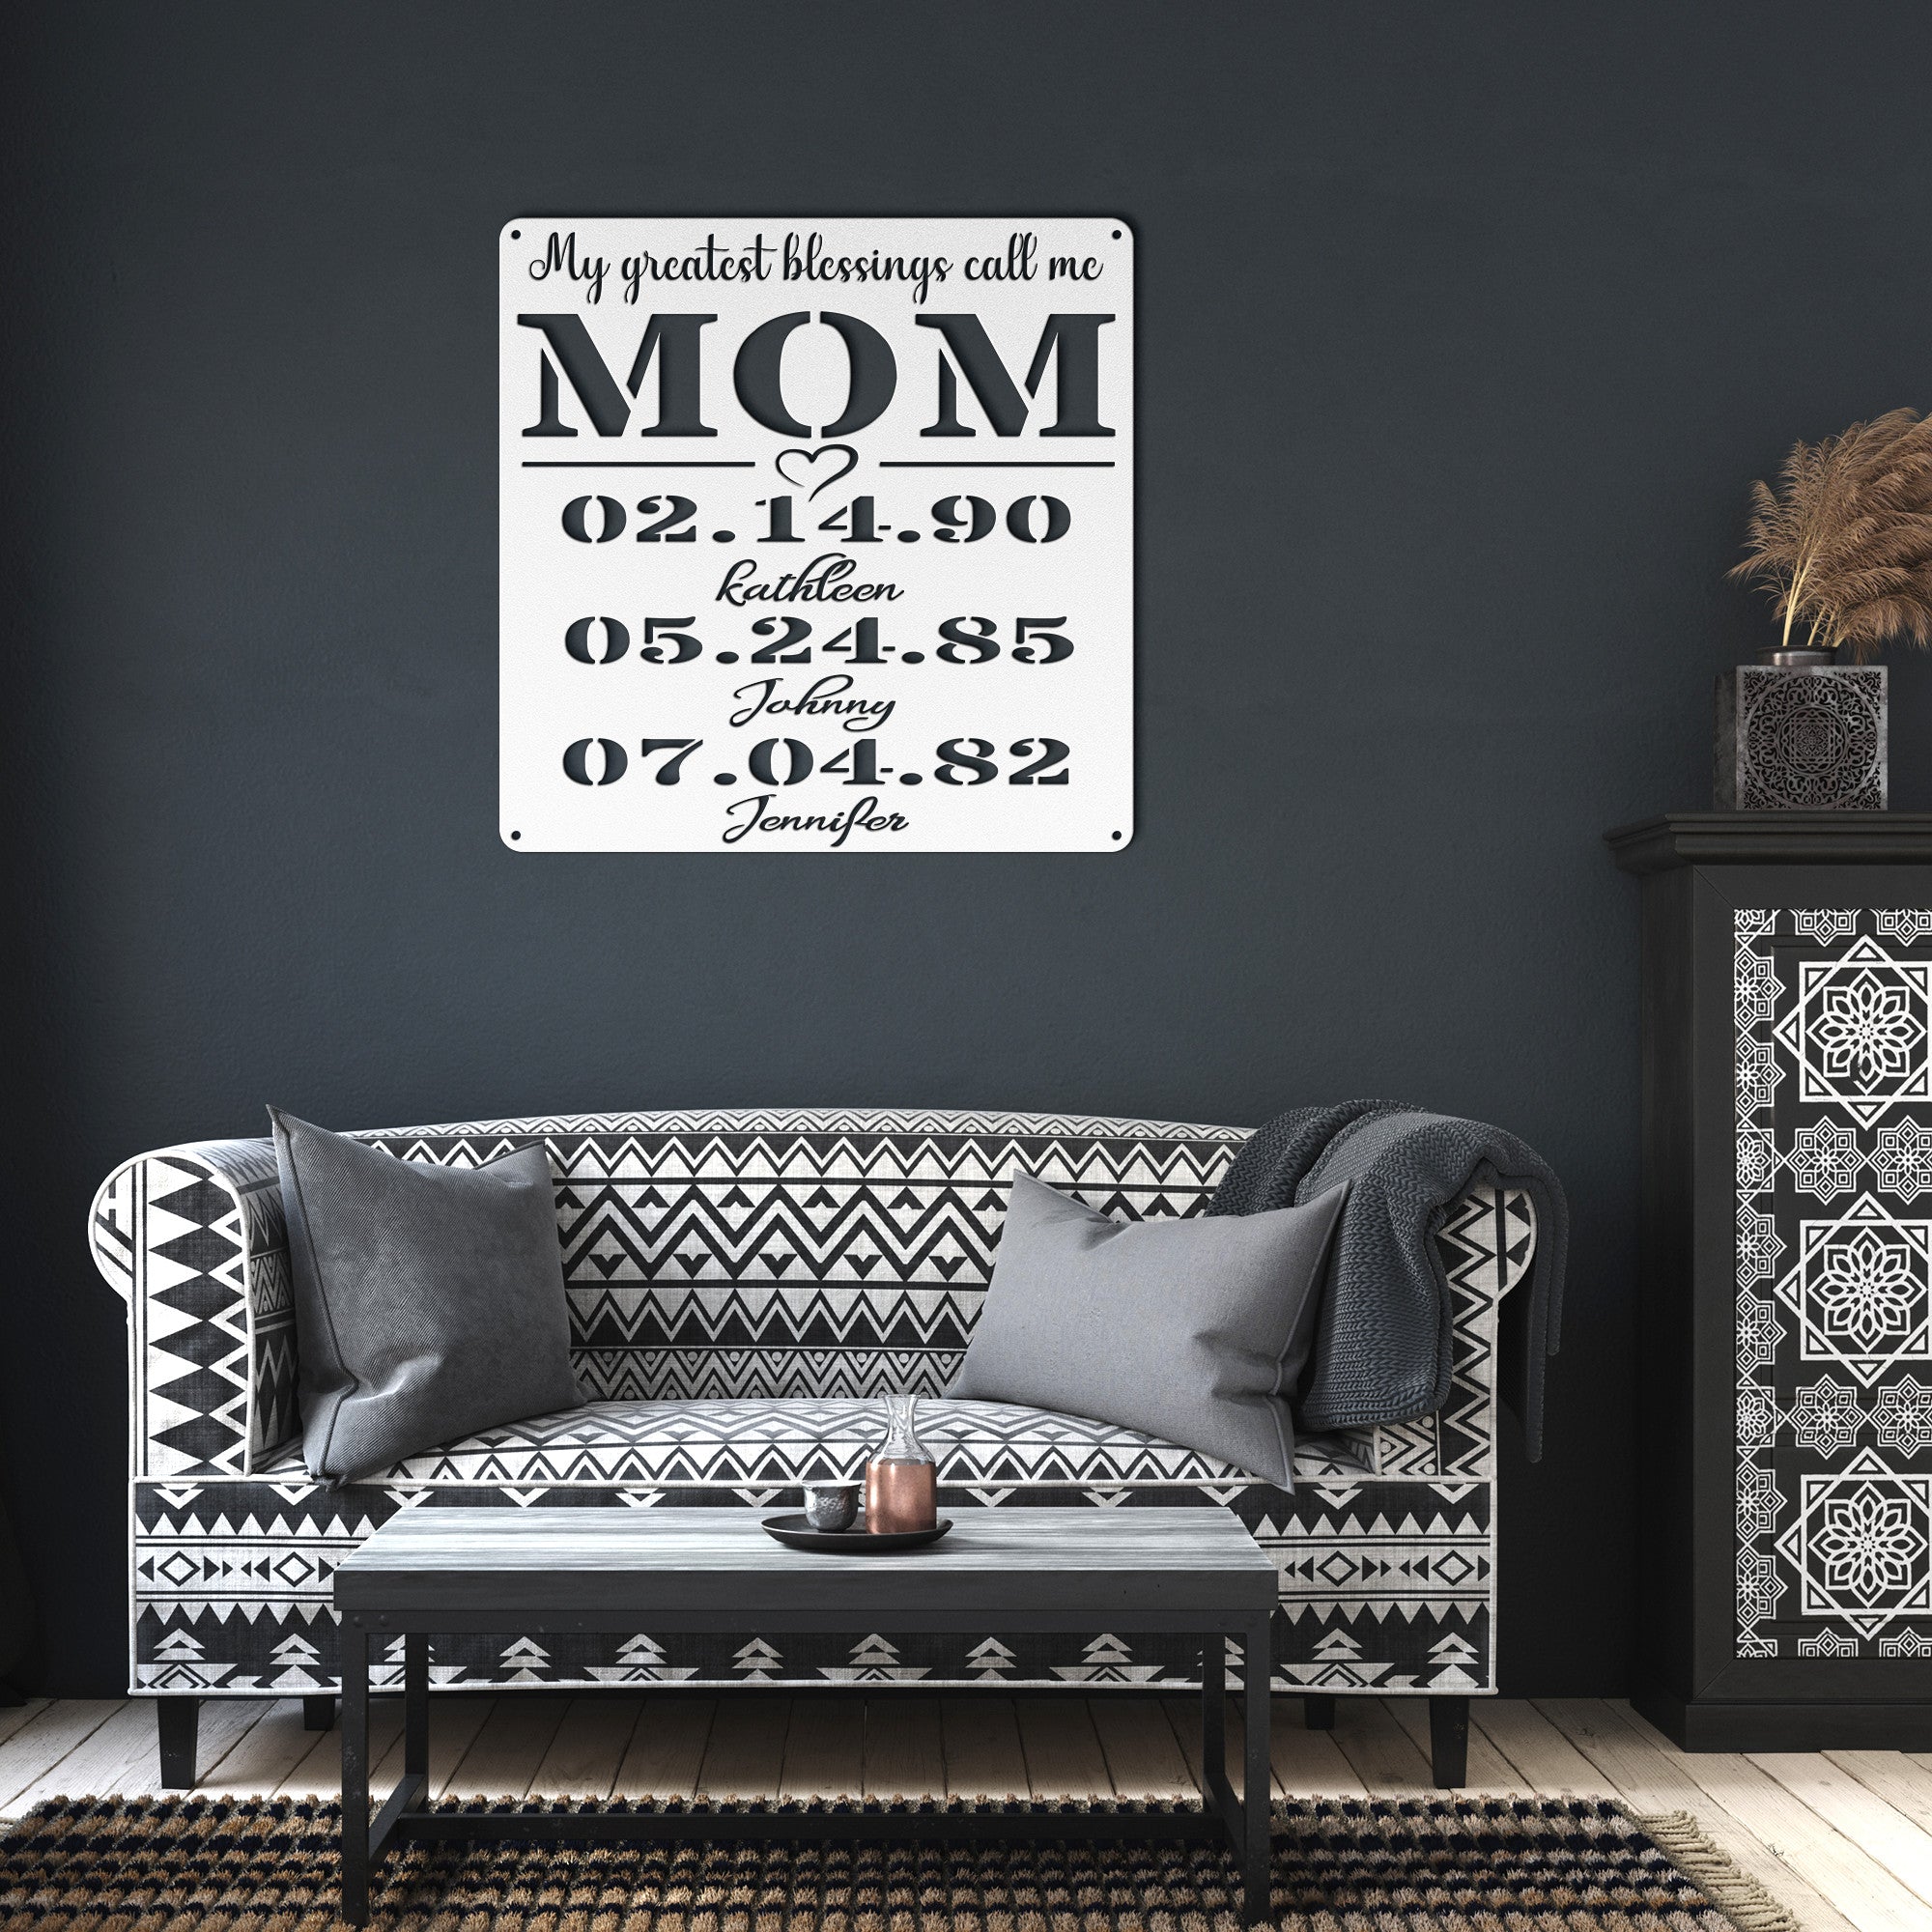 Personalized MOM Plaque - Cool Metal Signs